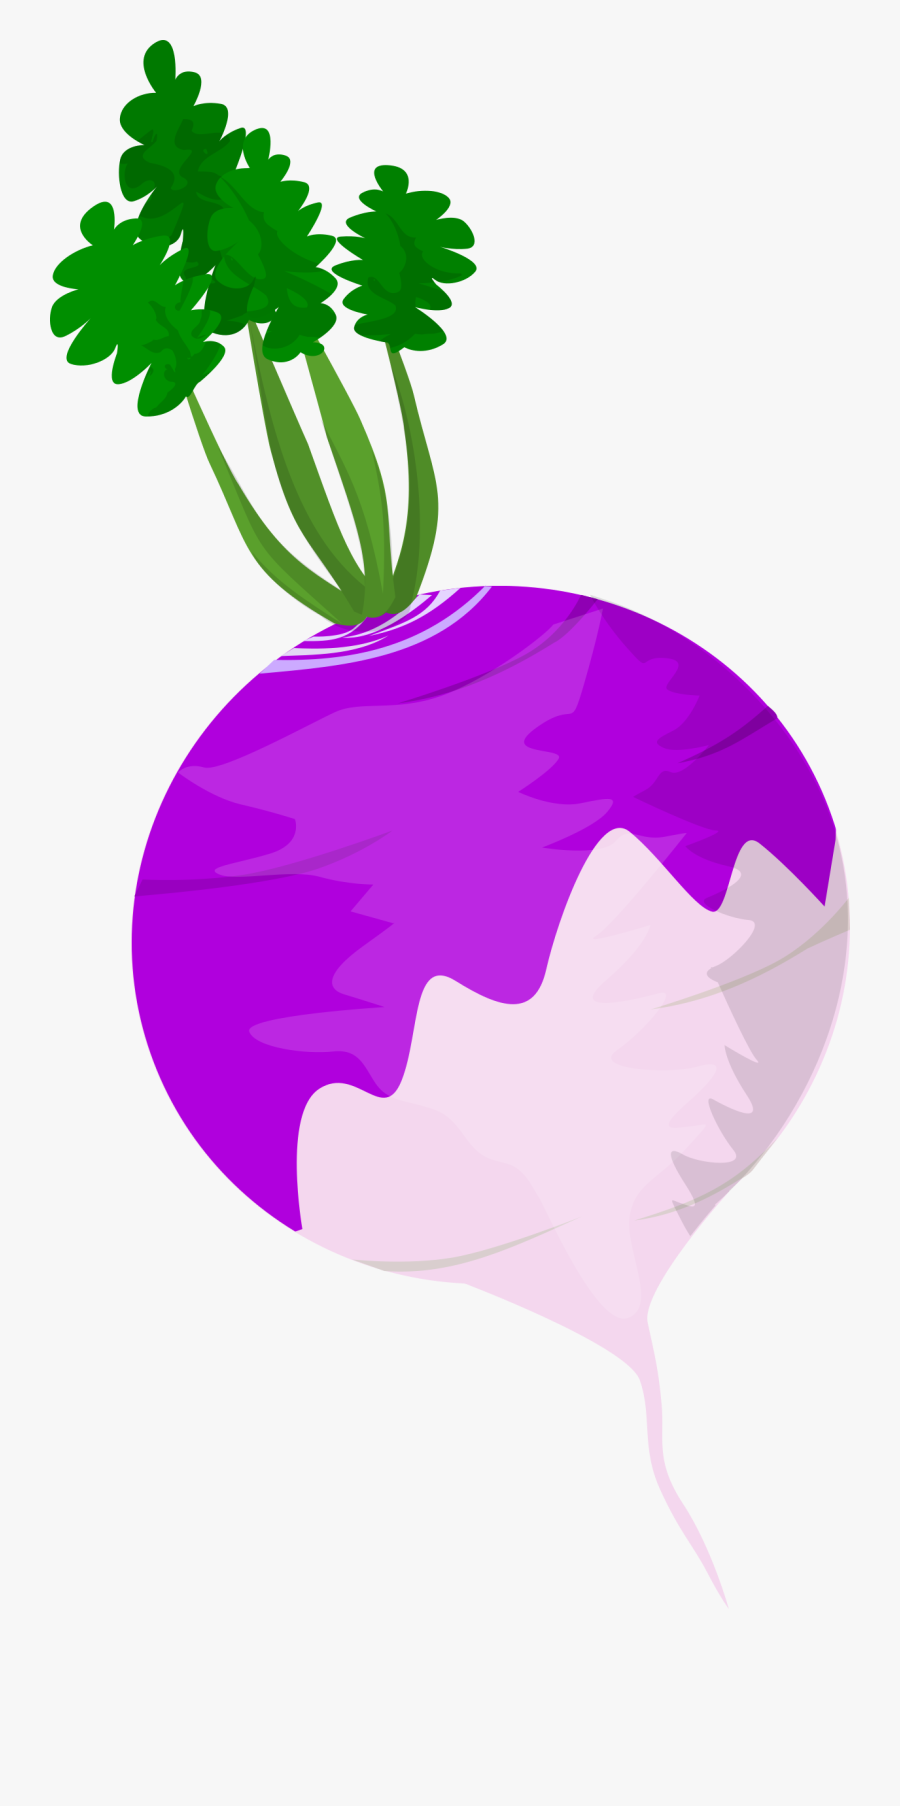 Vegetables Clipart Turnip - Turnip Clipart Png, Transparent Clipart